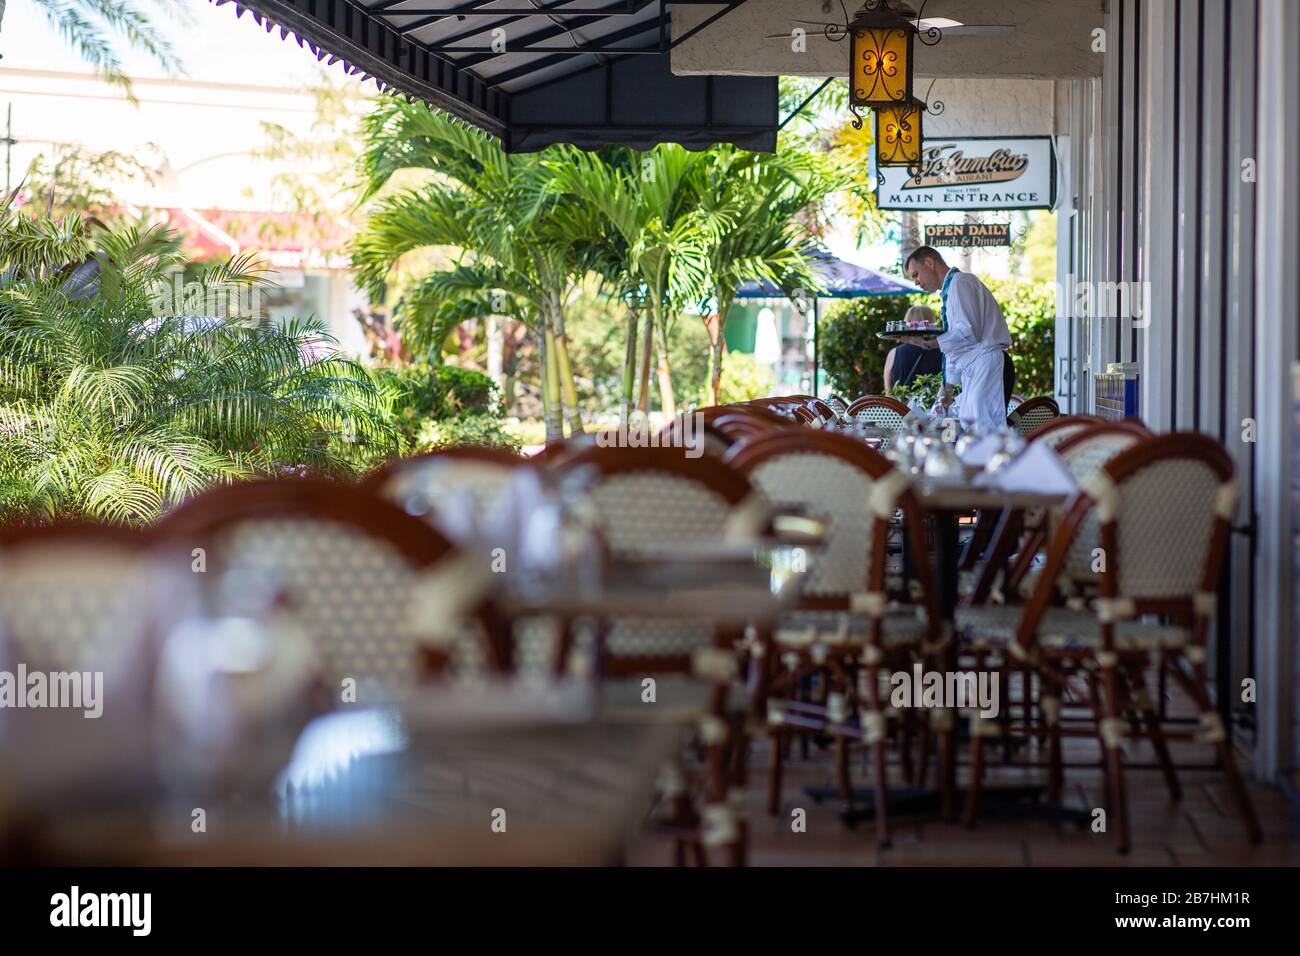 Restaurants in St. Armands Circle on Lido Key in Sarasota, Florida begin to see the effects of COVID-19 as sales begin to slow down. Stock Photo